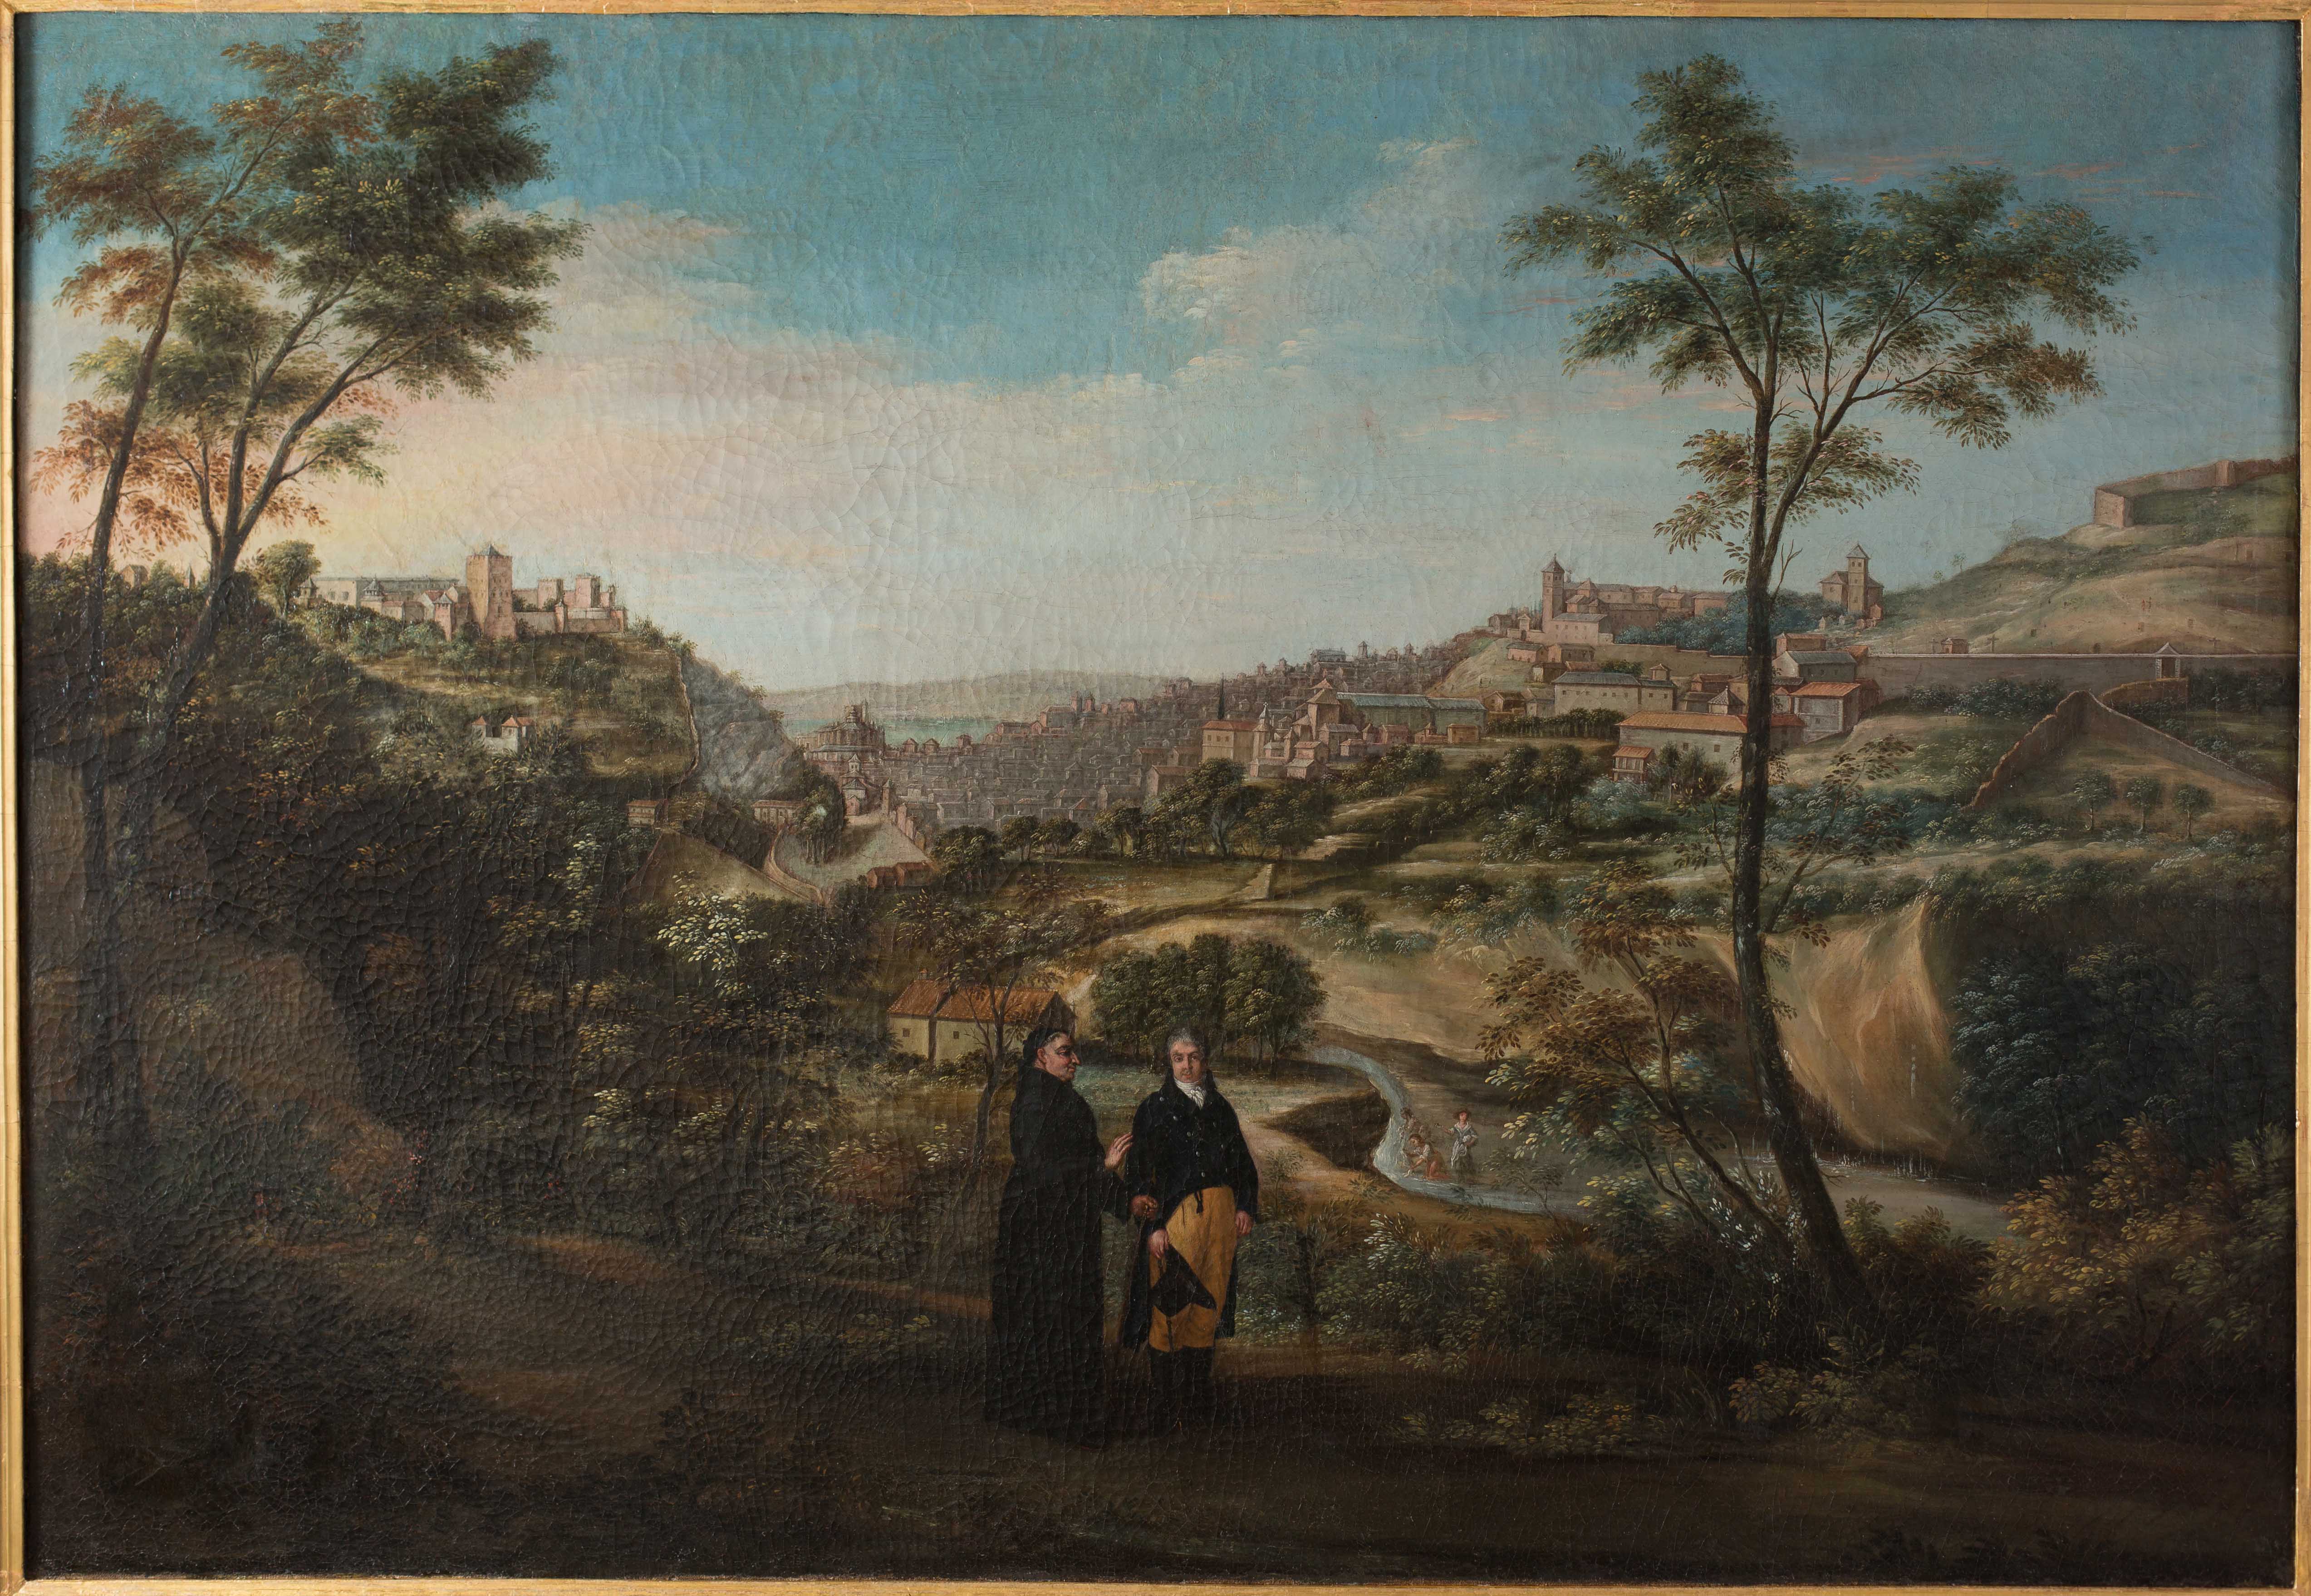 The Alhambra enlarges its art collection with the acquisition of a painting from 1798 by Fernando Marín entitled “Vista de Granada desde la Fuente del Avellano”